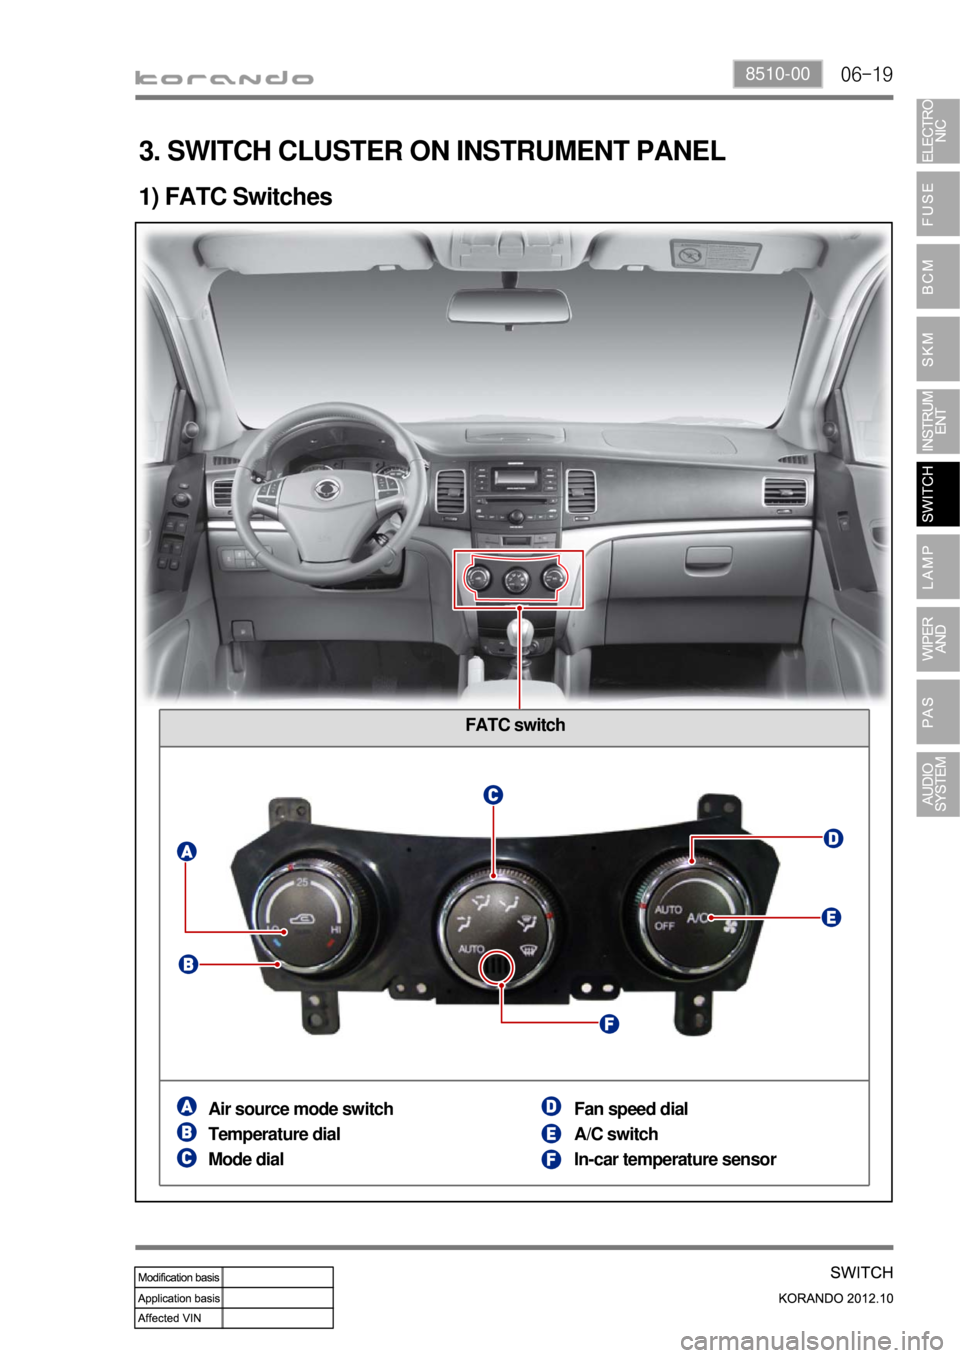 SSANGYONG KORANDO 2012  Service Manual 06-198510-00
FATC switch
1) FATC Switches
Air source mode switch
Temperature dial
Mode dialFan speed dial
A/C switch
In-car temperature sensor
3. SWITCH CLUSTER ON INSTRUMENT PANEL 